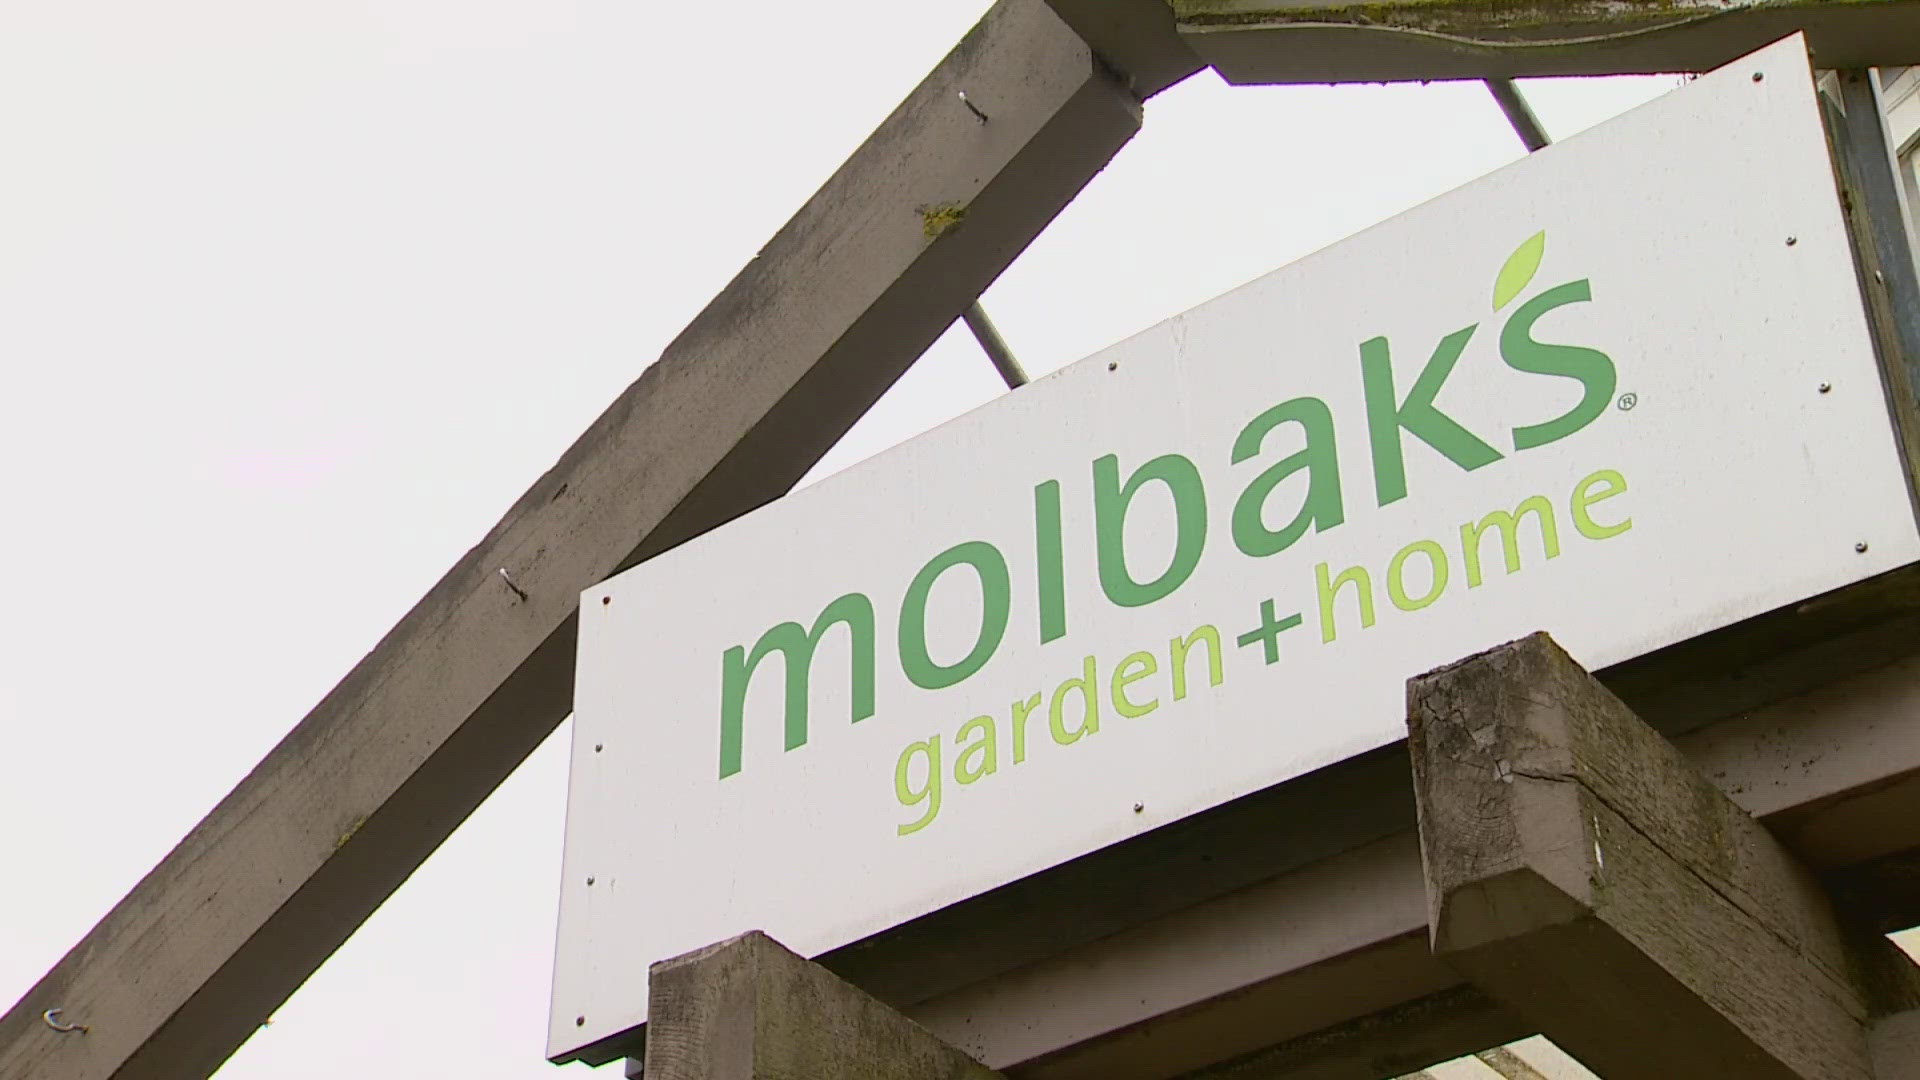 The owners of Molbak’s announced plans to transform the garden retailers’ former site following the support it received during its closure earlier this year.